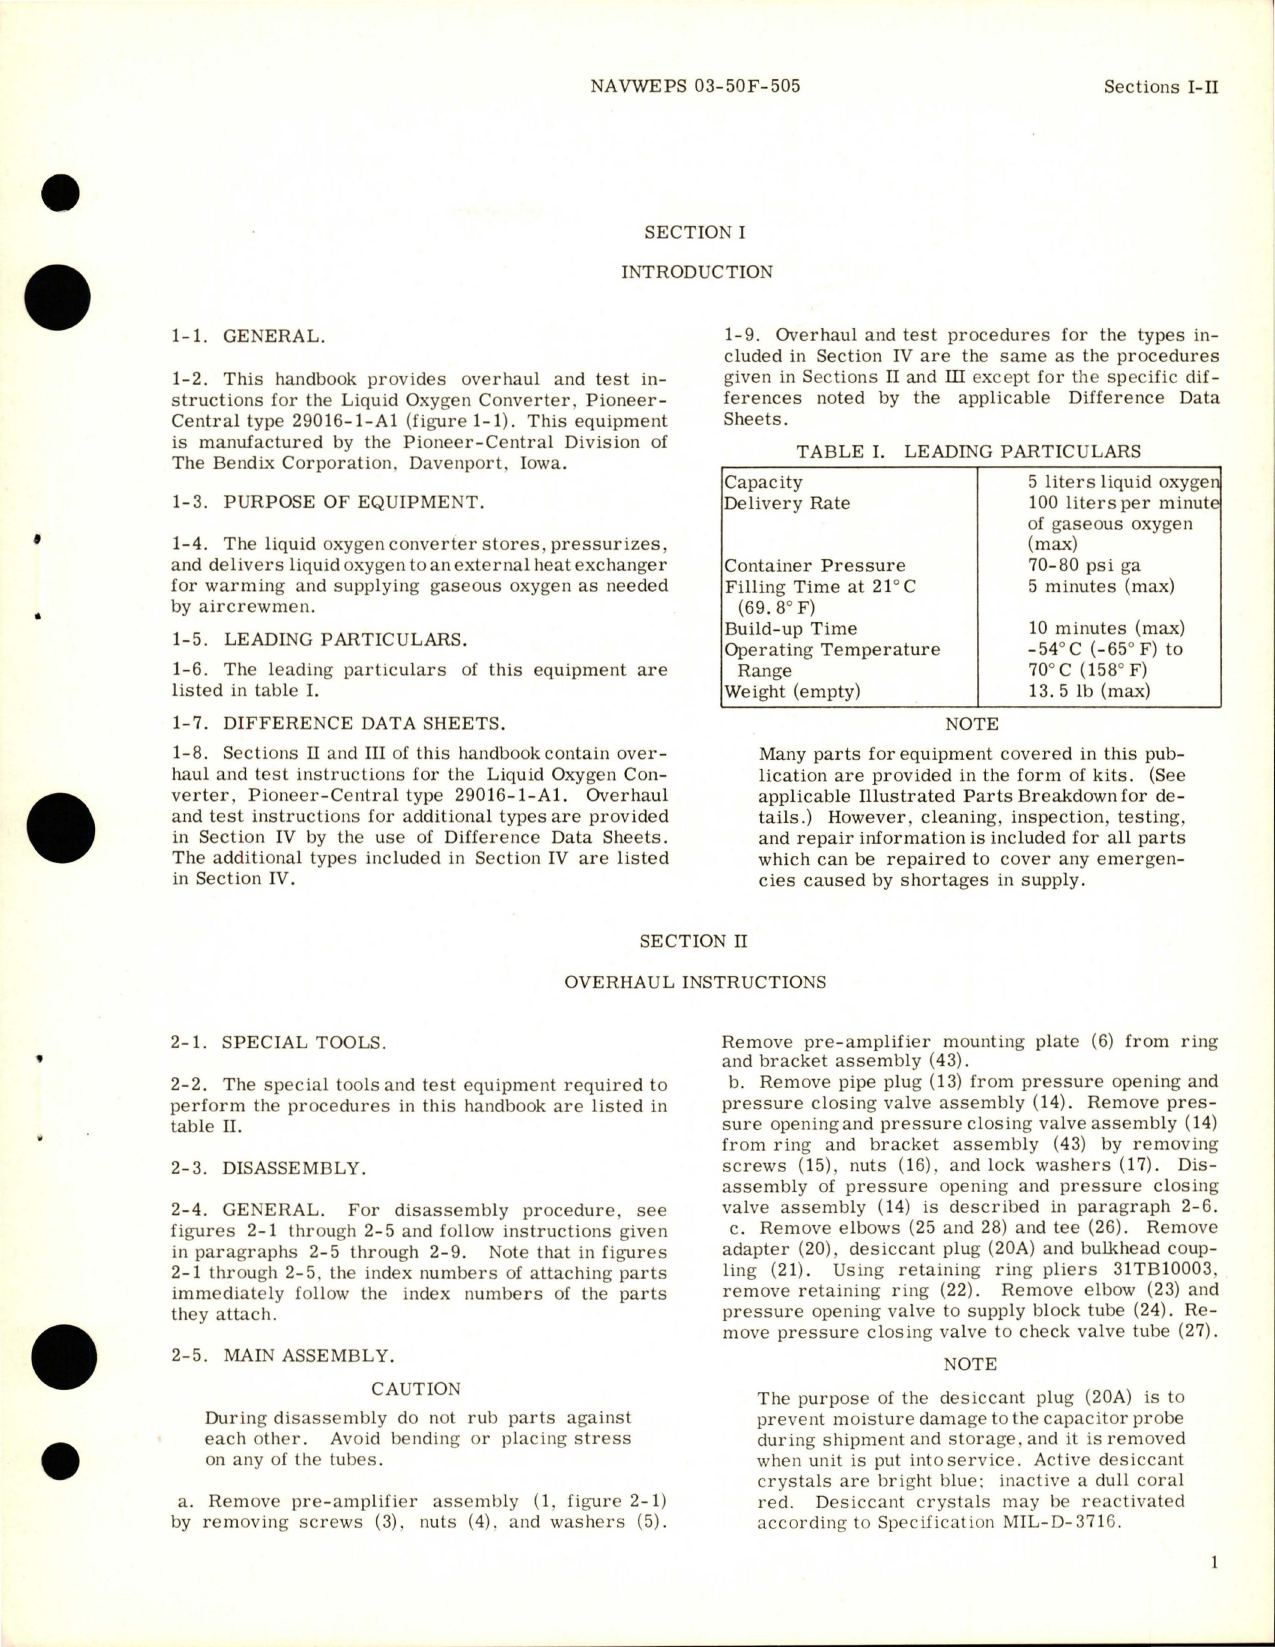 Sample page 5 from AirCorps Library document: Overhaul Instructions for Liquid Oxygen Converter - Types 29016-1-A1, 29022-1-A1, and 9022-1-A2 